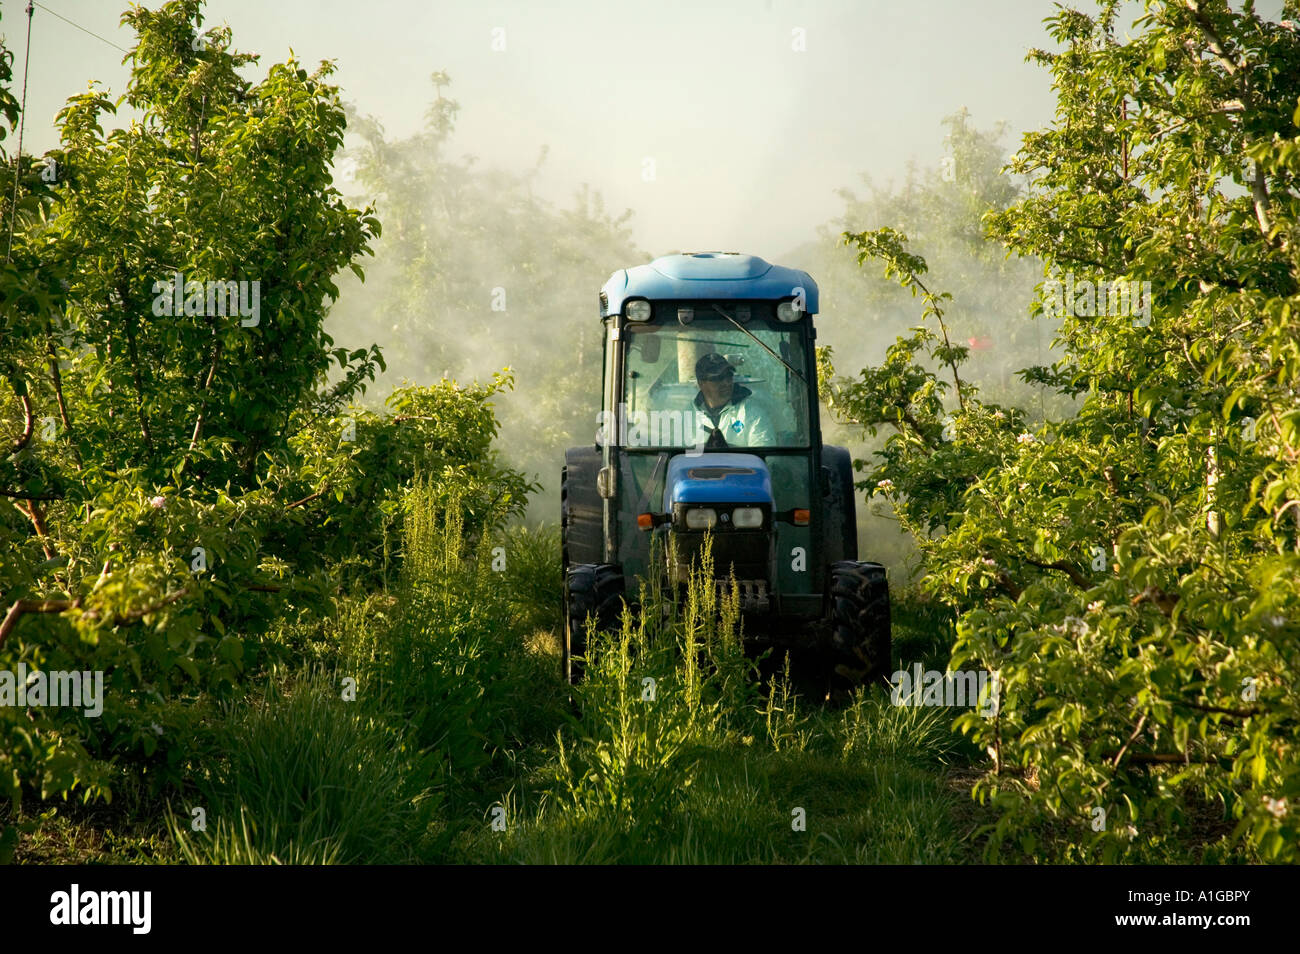 Tractor with sprayer applying chemicals Stock Photo